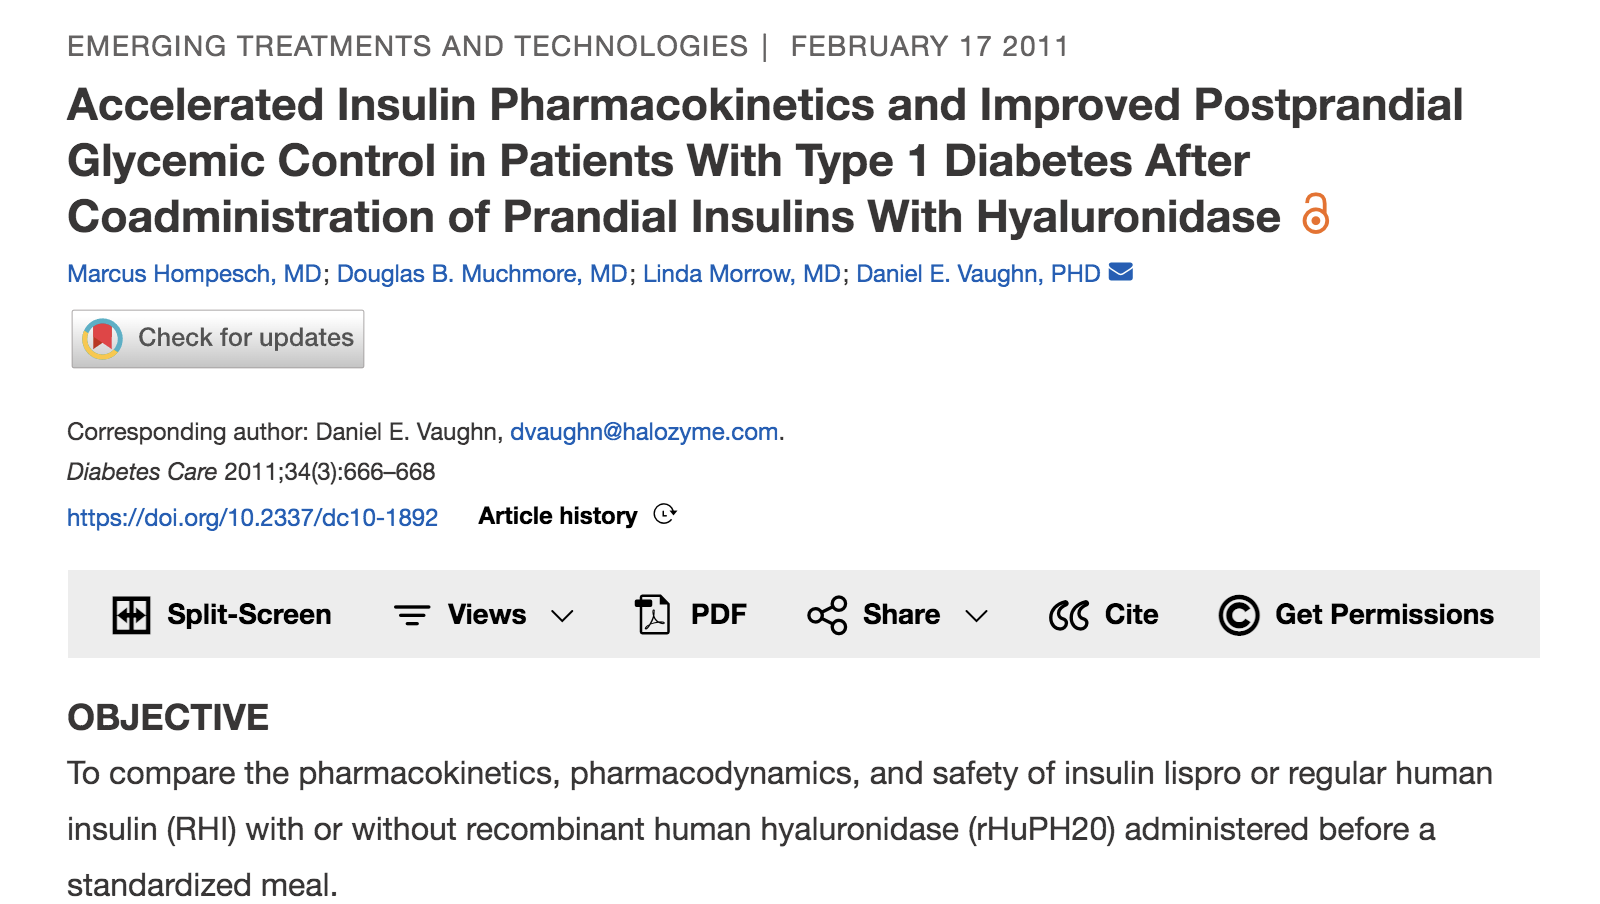 image of Accelerated insulin pharmacokinetics and improved postprandial glycemic control in patients with type 1 diabetes after coadministration of prandial insulins with hyaluronidase.